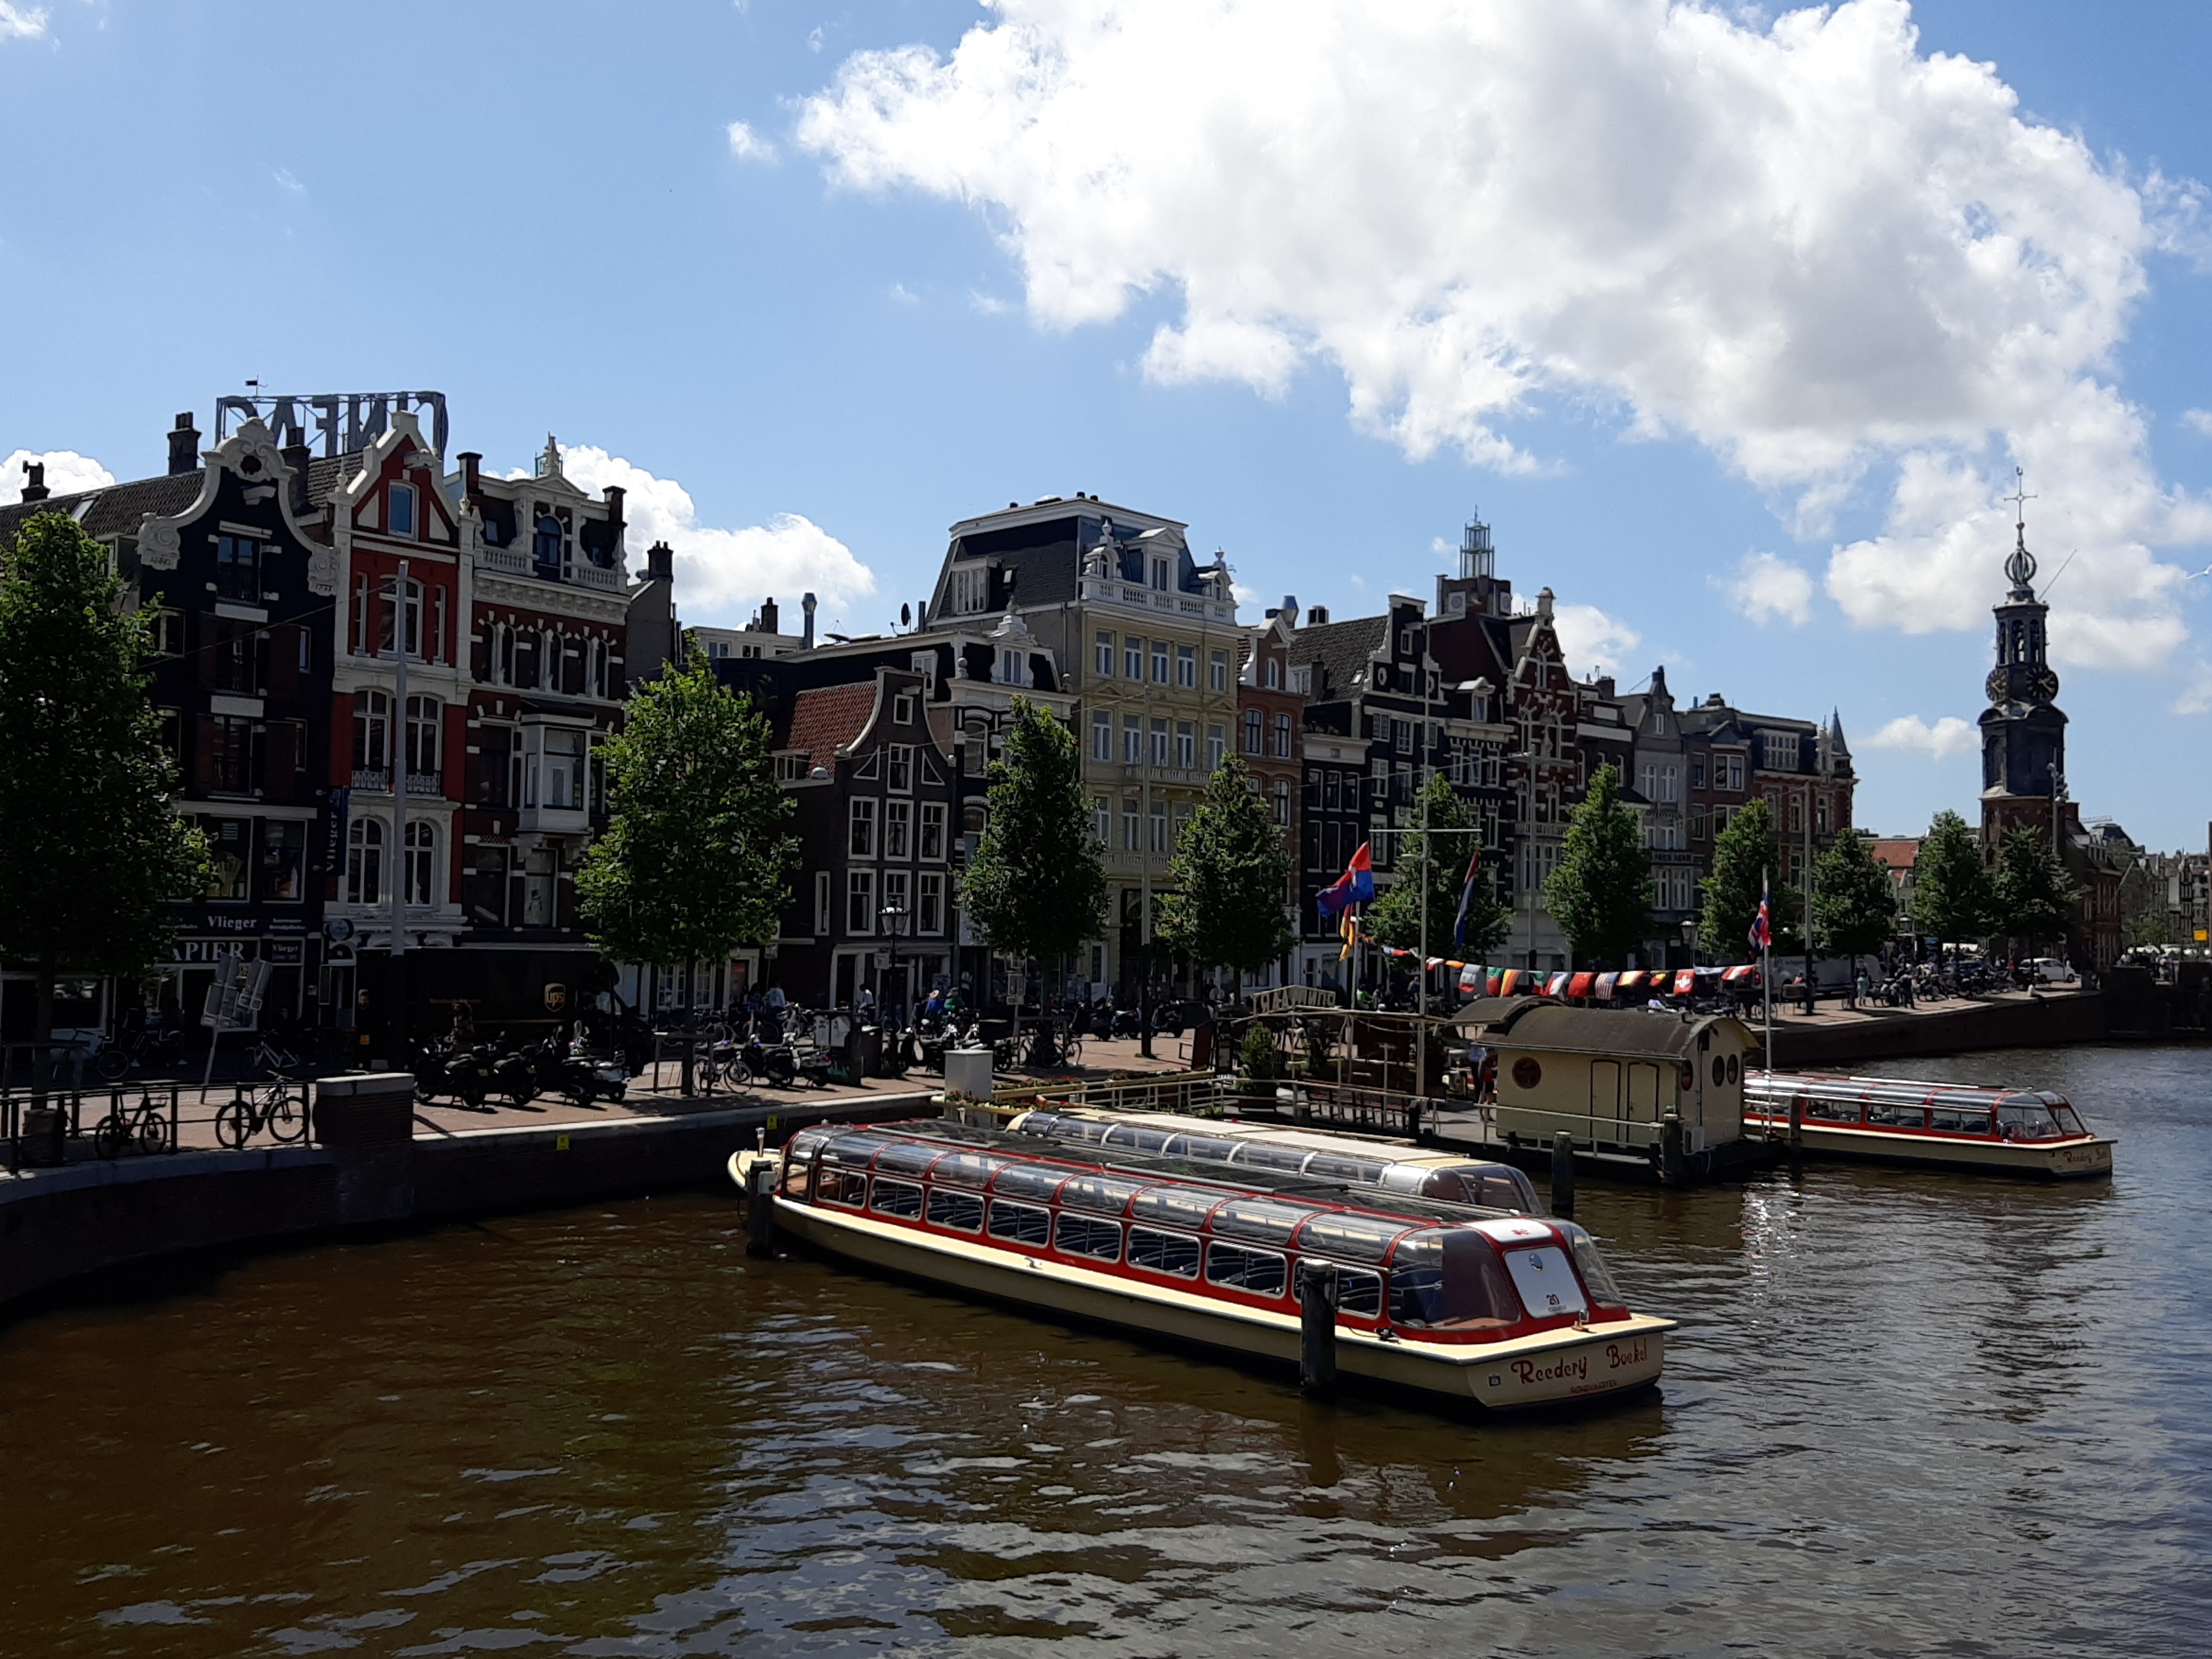 Canal at Singel, Amsterdam, the Netherlands rephoto